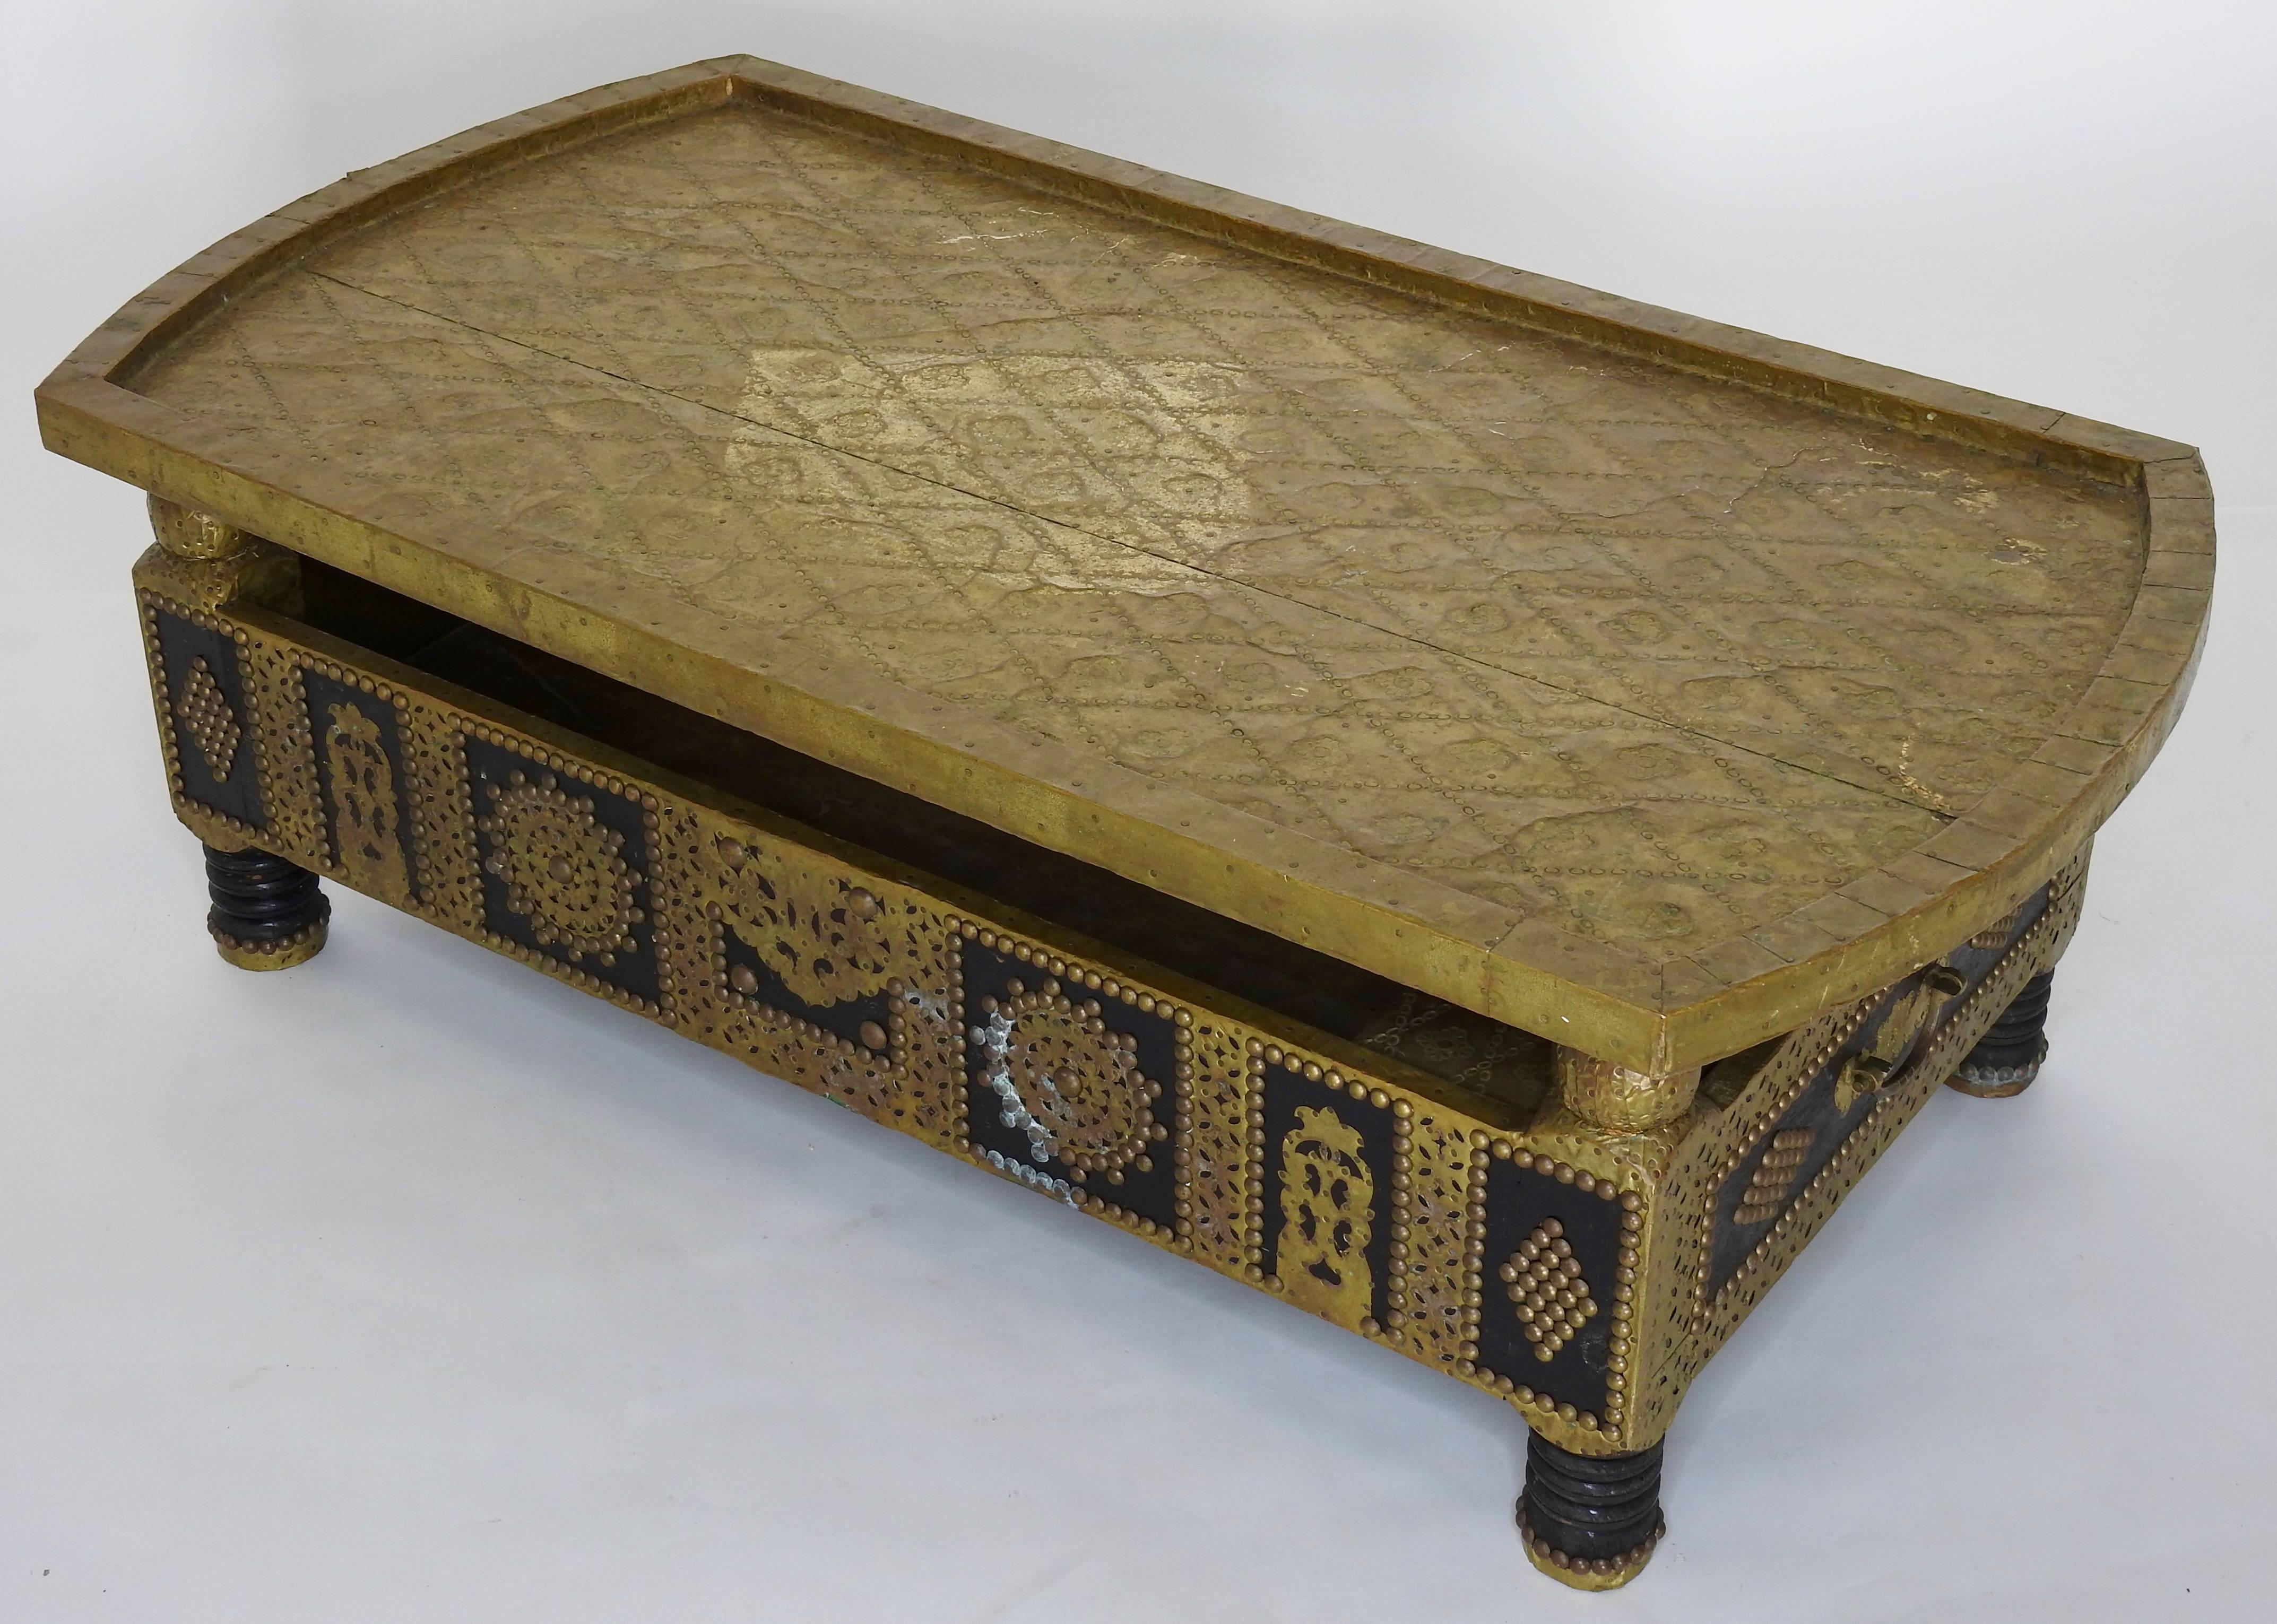 This is an ornate wooden coffee table detailed with hammered brass and tacks. The top can easily be removed for storage. The brass boasts a nice aged patina. The table is signed but we cannot determine the maker.